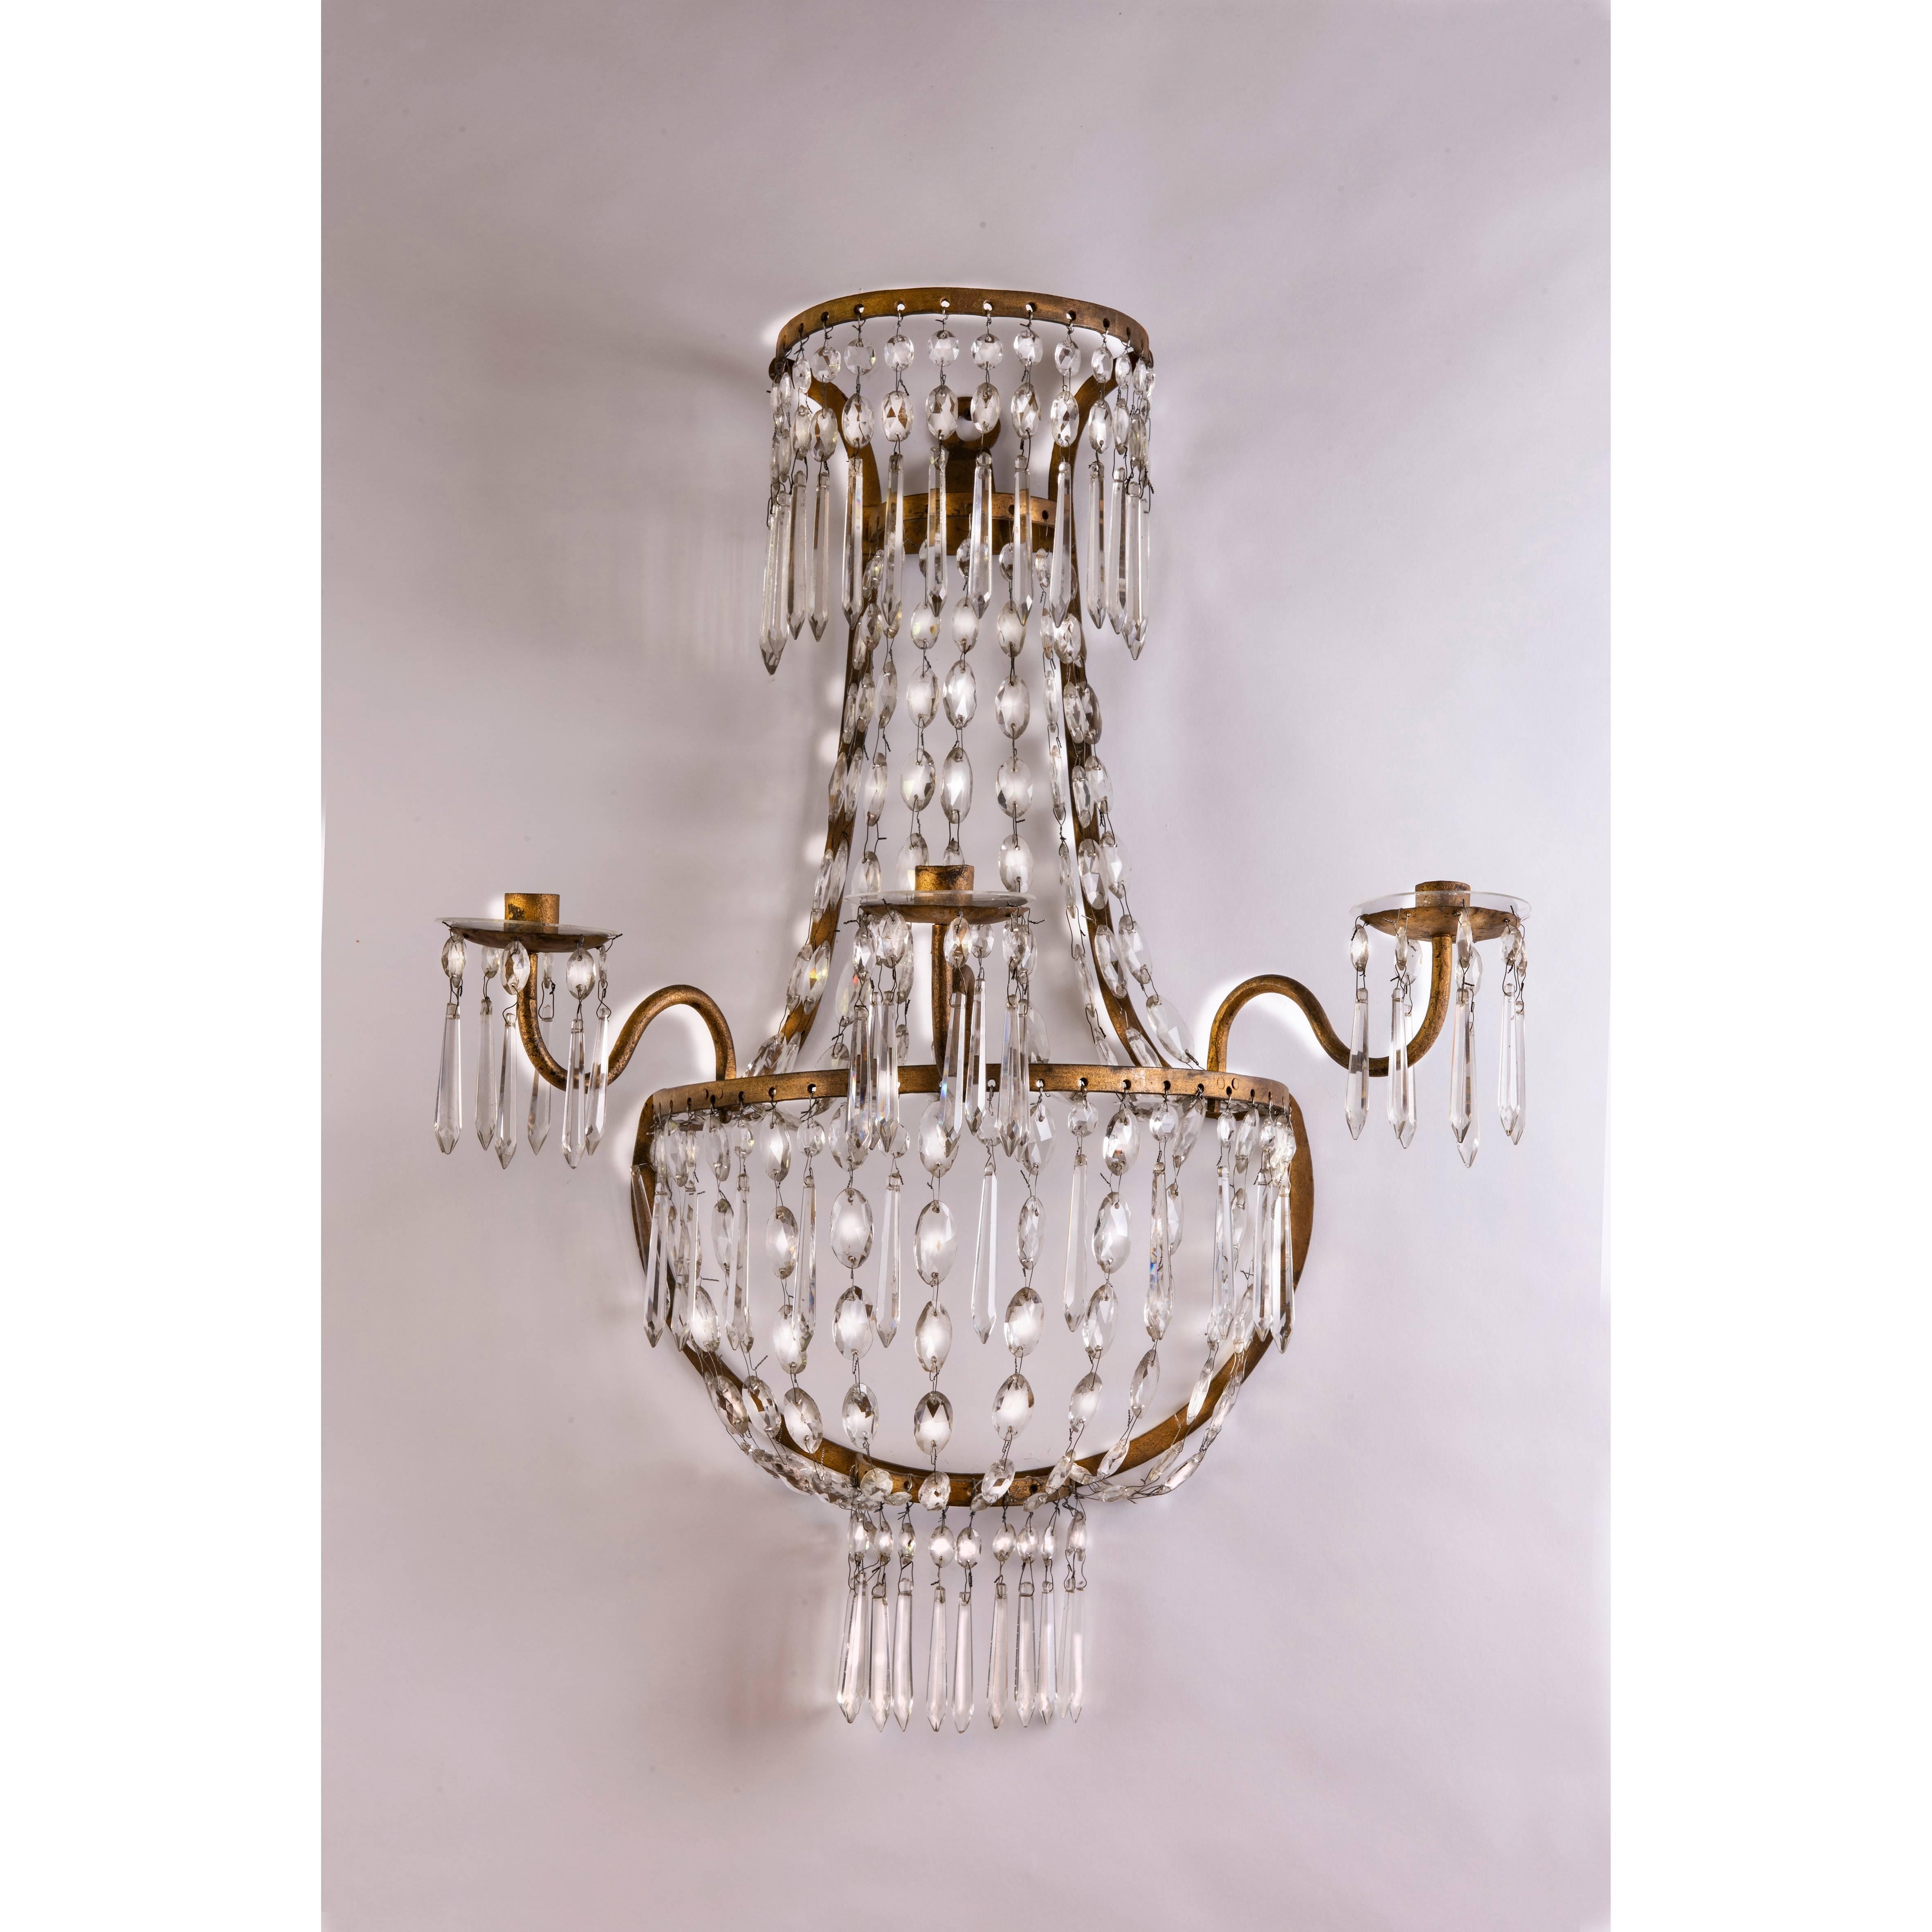 Pair of 19th century Empire crystal three-light sconces, Italian wall candleholders with a semi-circular gilt iron basket frame, future with beaded crystal chains and a new mirror plate on a shaped wooden panel the back,  useless to cover wiring